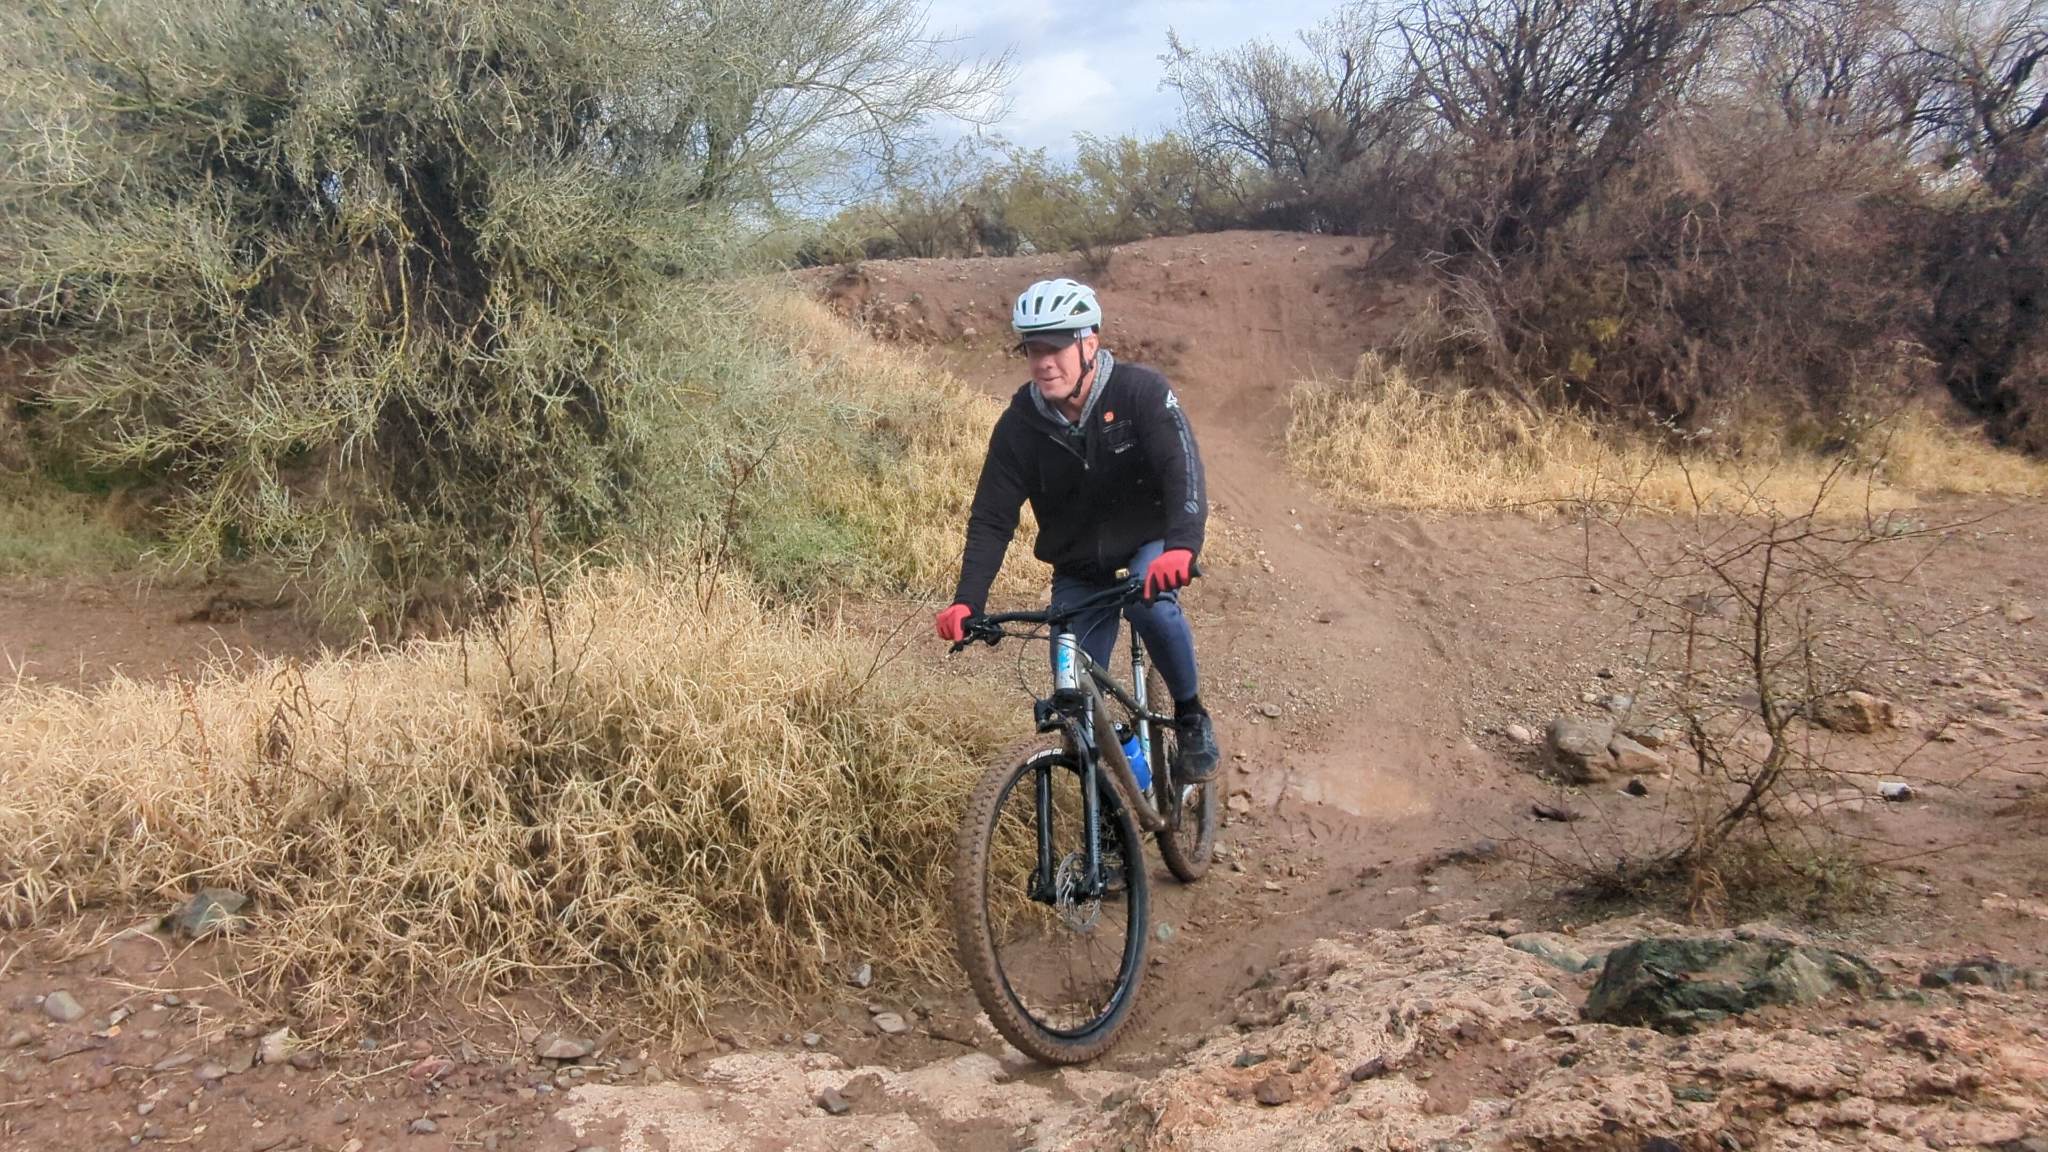 Brent comes rolling down a hill during our Phoenix mountain bike tour together.